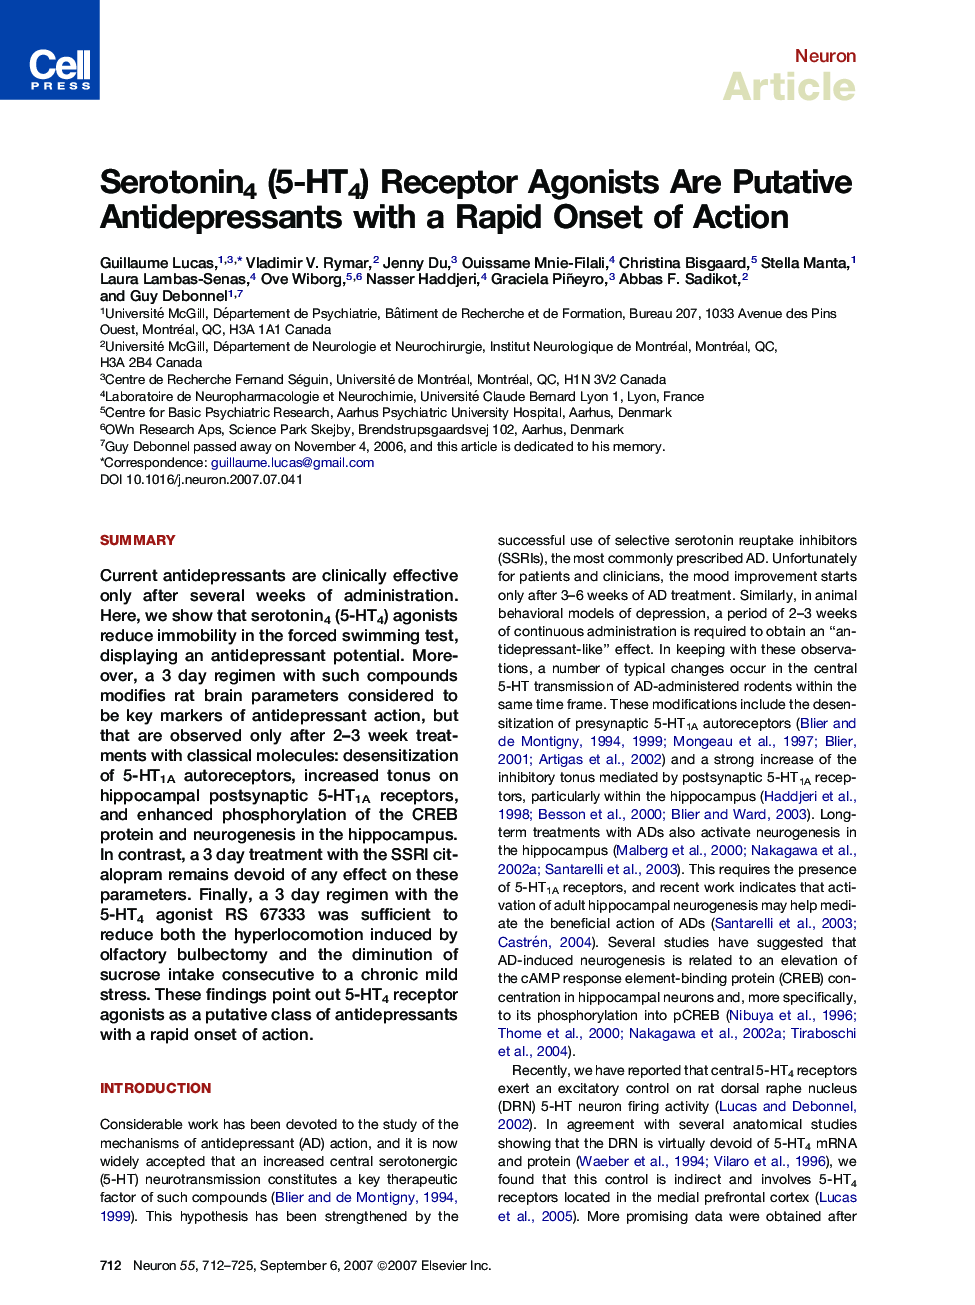 Serotonin4 (5-HT4) Receptor Agonists Are Putative Antidepressants with a Rapid Onset of Action